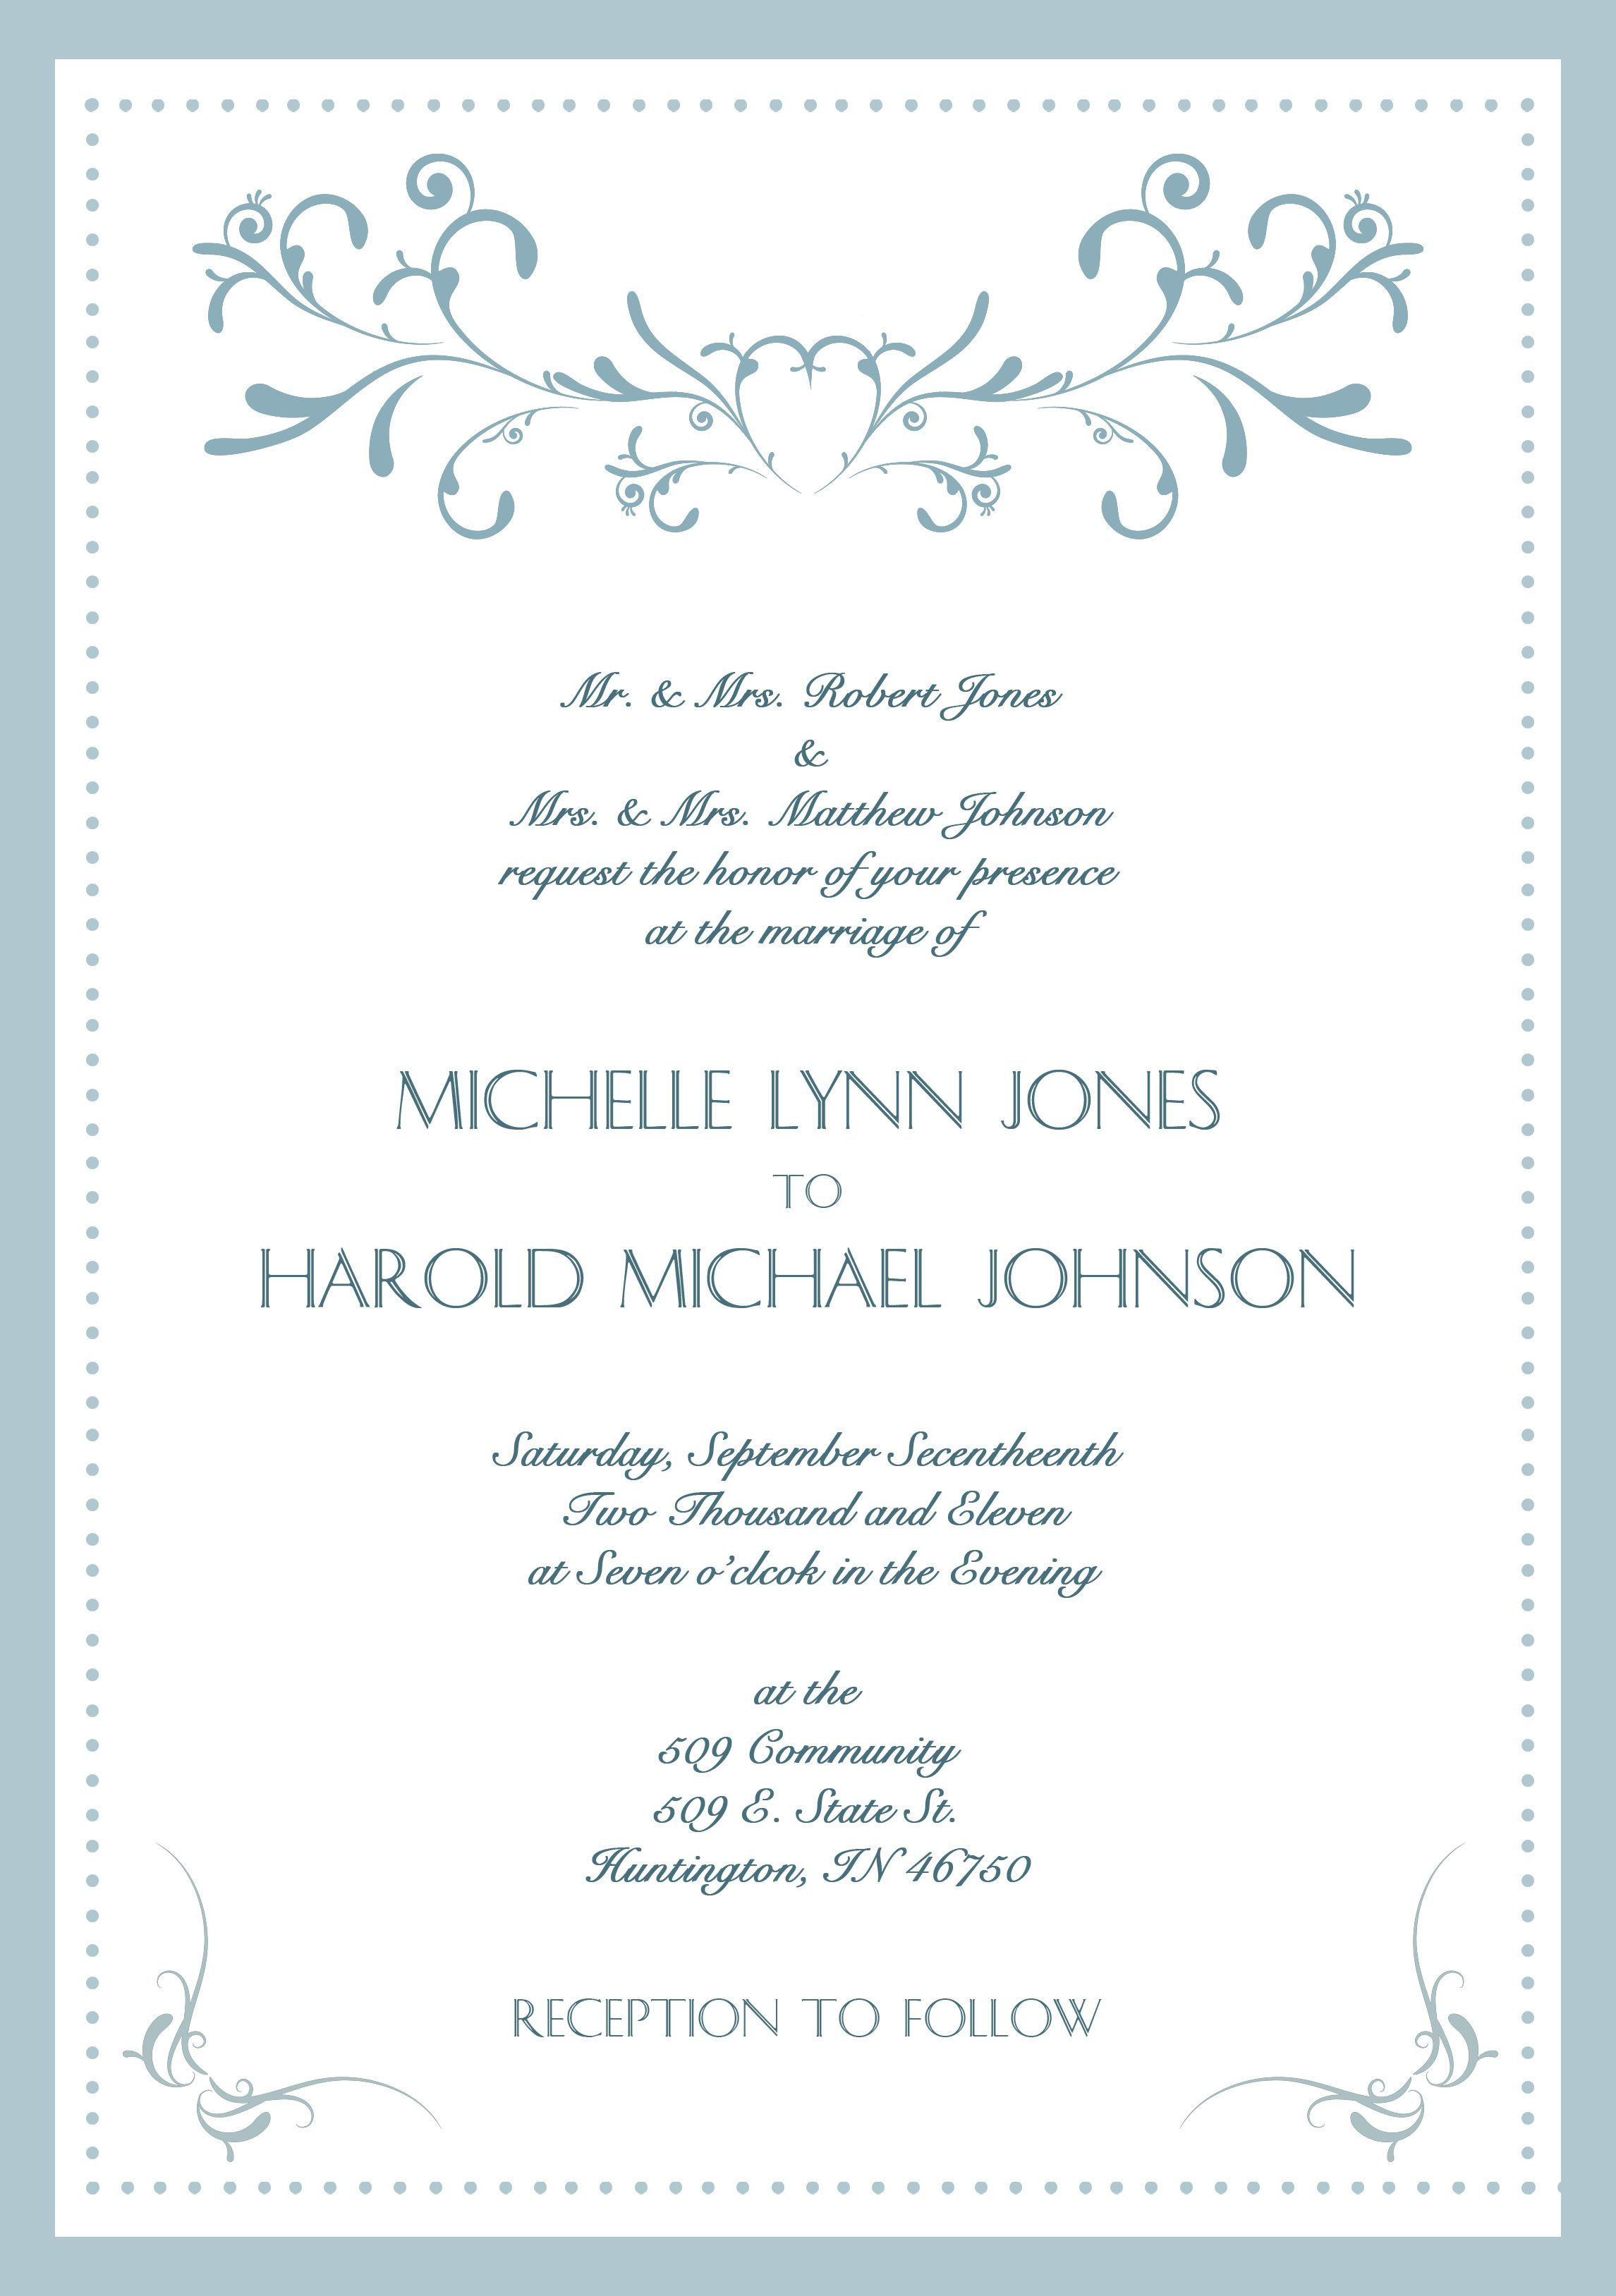 Official Invitation Card Template Business Template Ideas